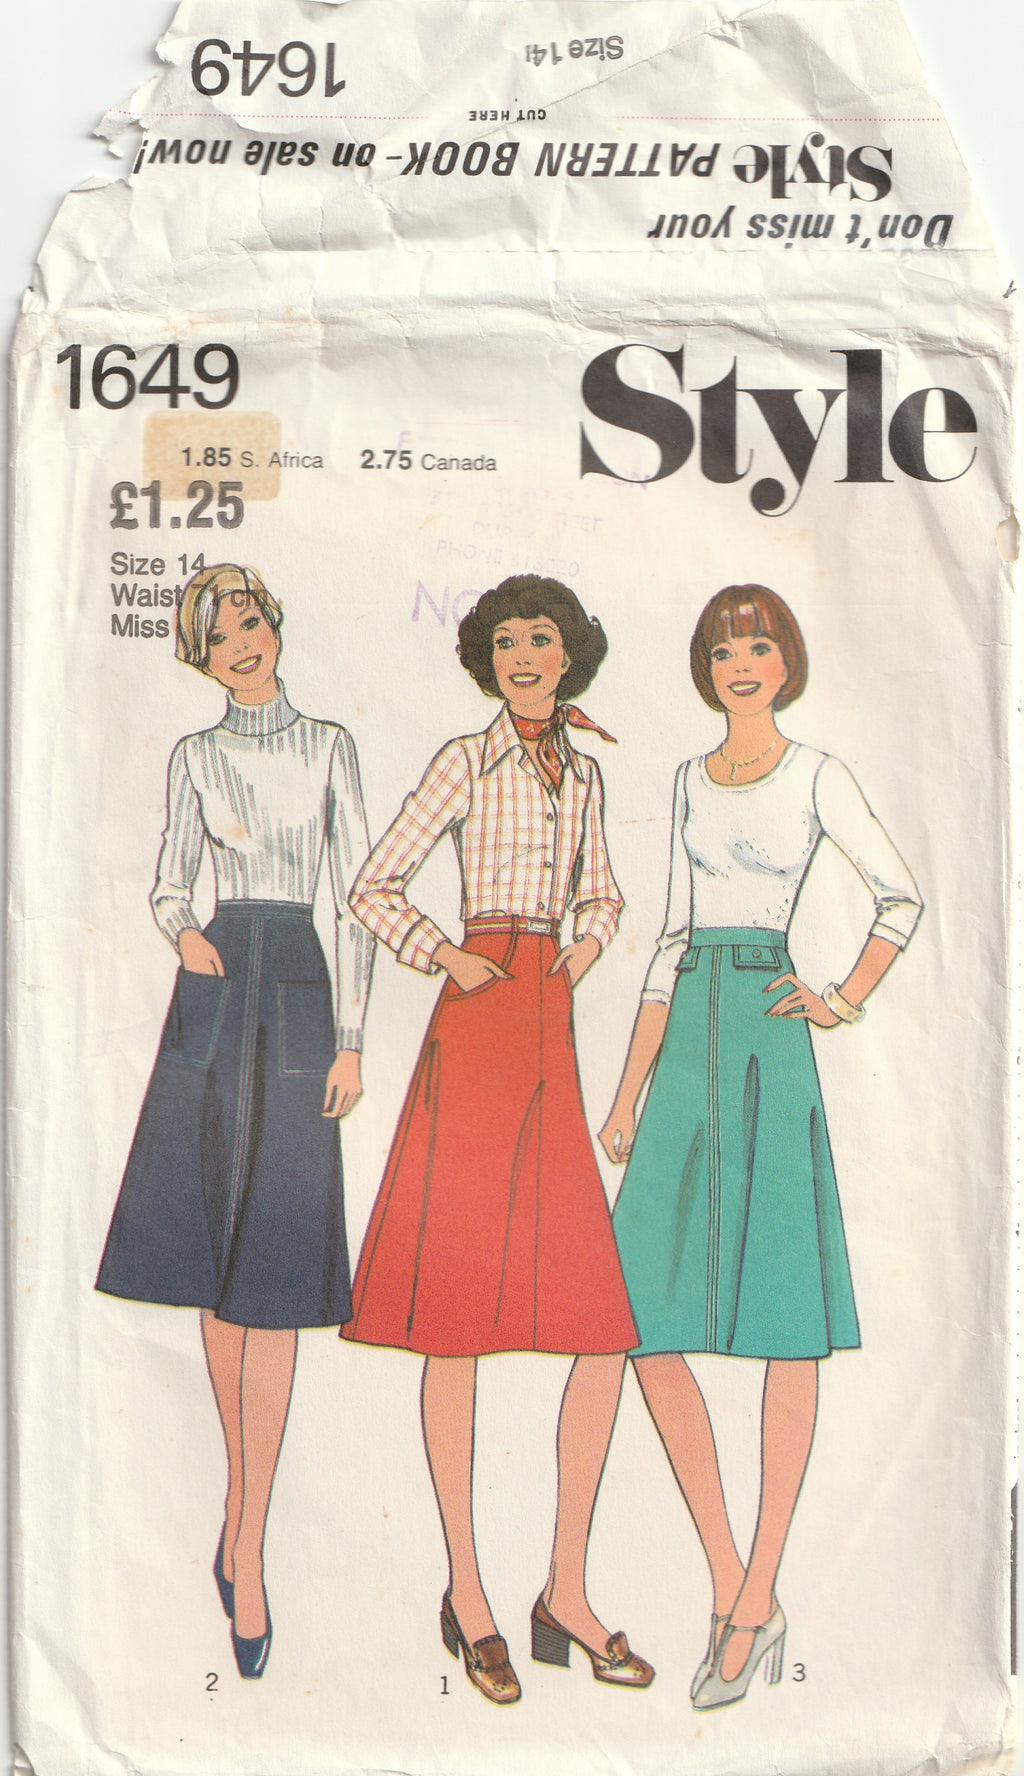 vintage sewing pattern flared skirt with pockets 1970s style 1649 waist 71 cm